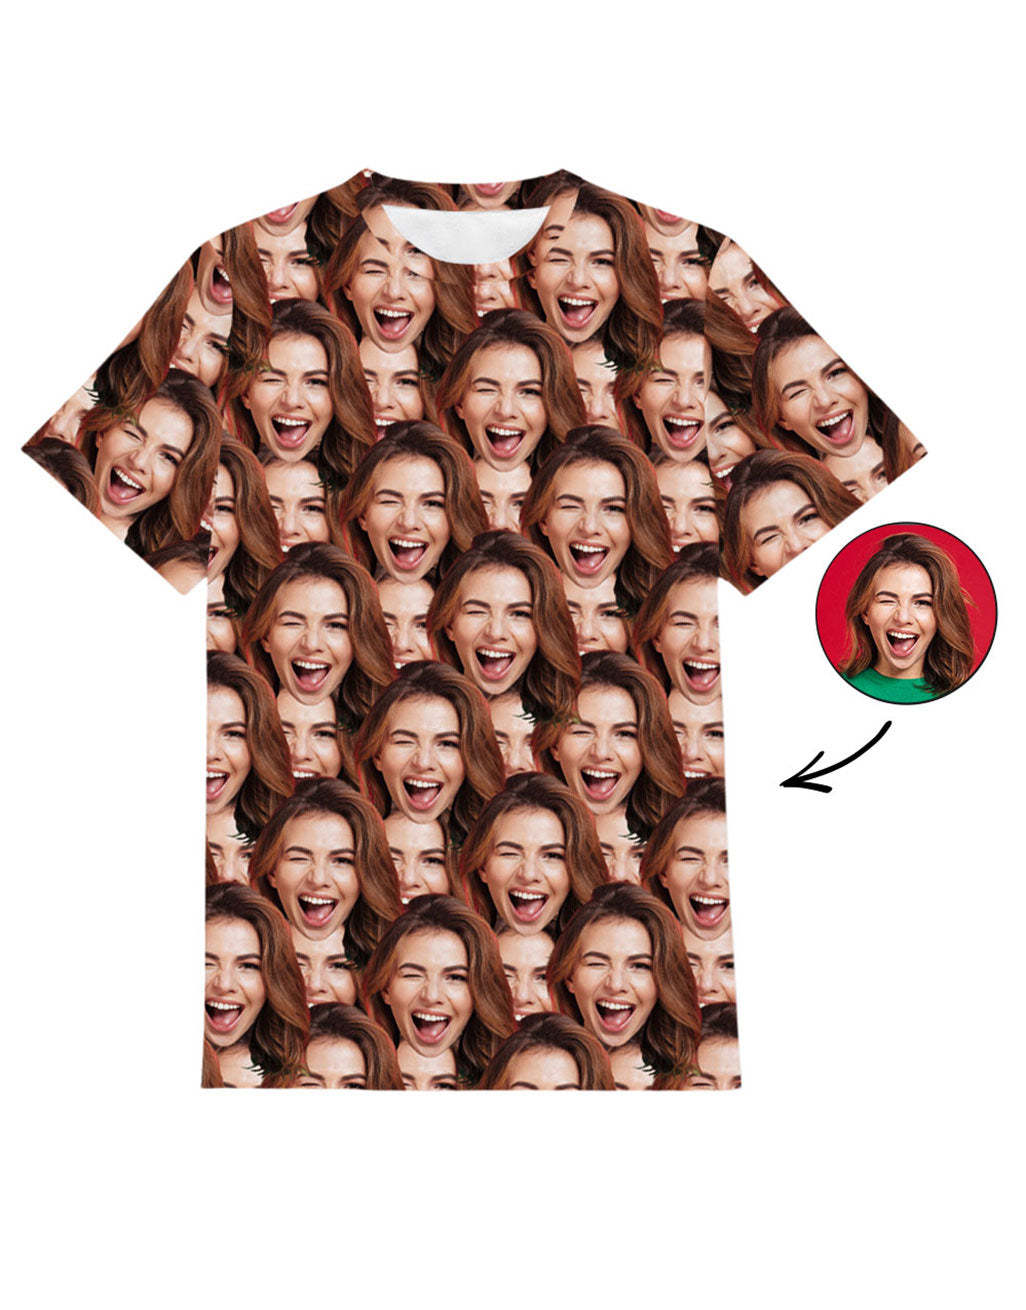 Personalized face t shirt